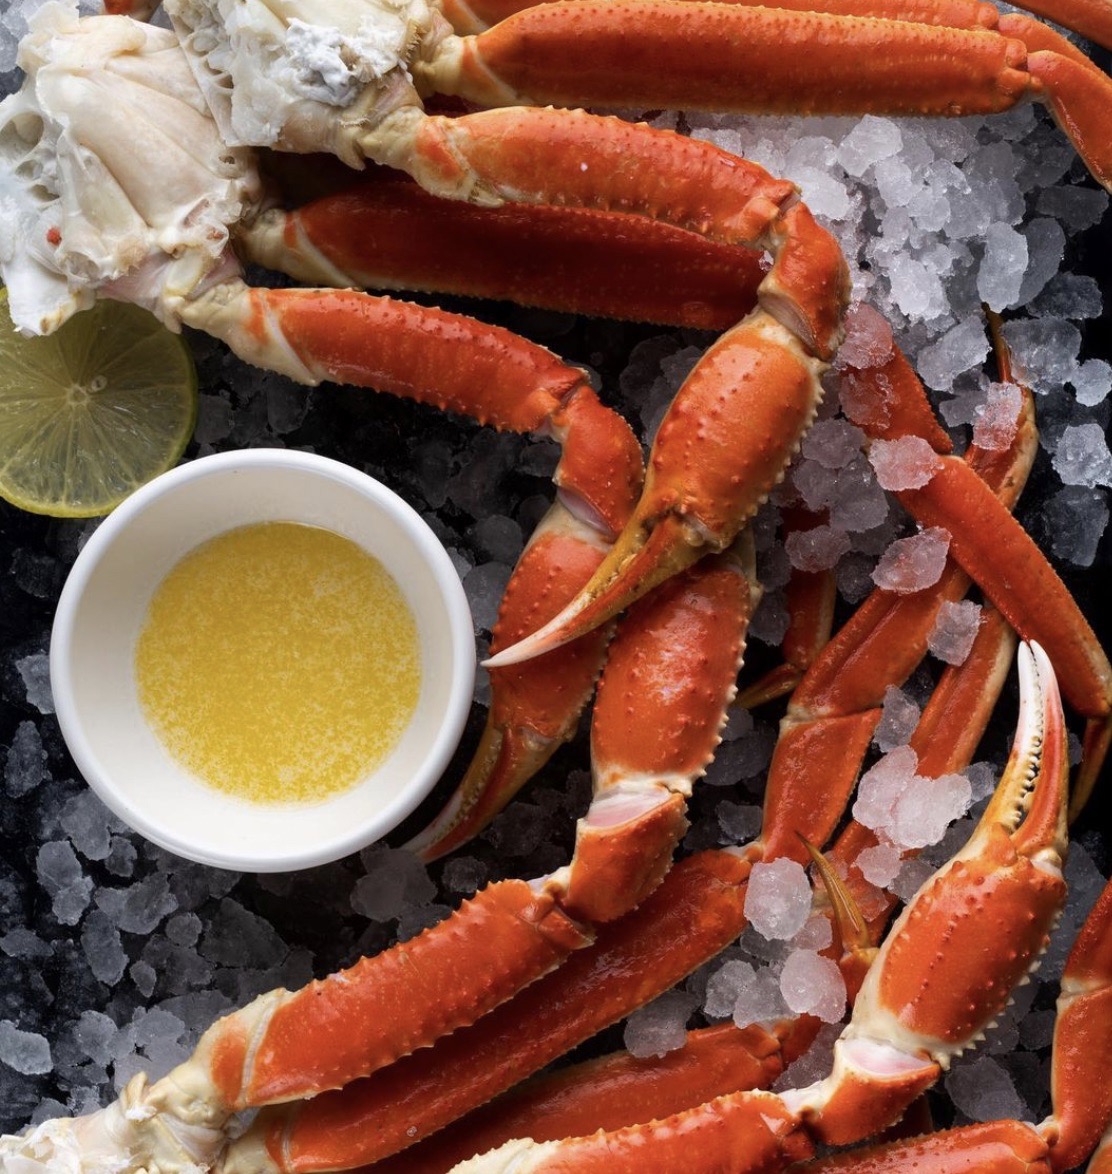 Snow Crab: Where to find it in Montreal